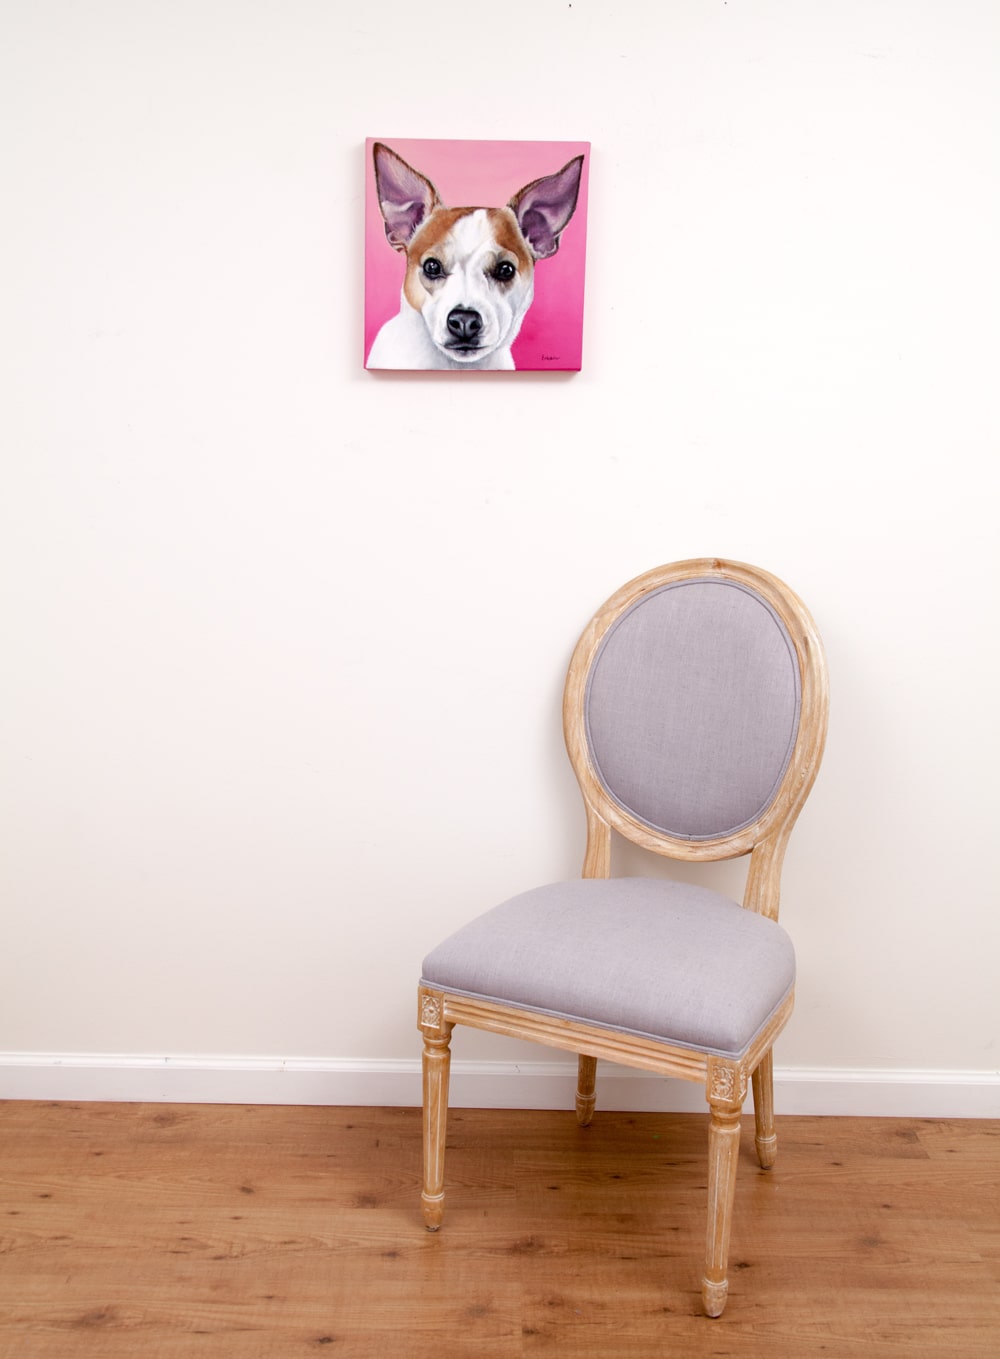 Custom dog portrait of a jack russell and chihuahua dog by fine arts painter Erica Eriksdotter, with chair